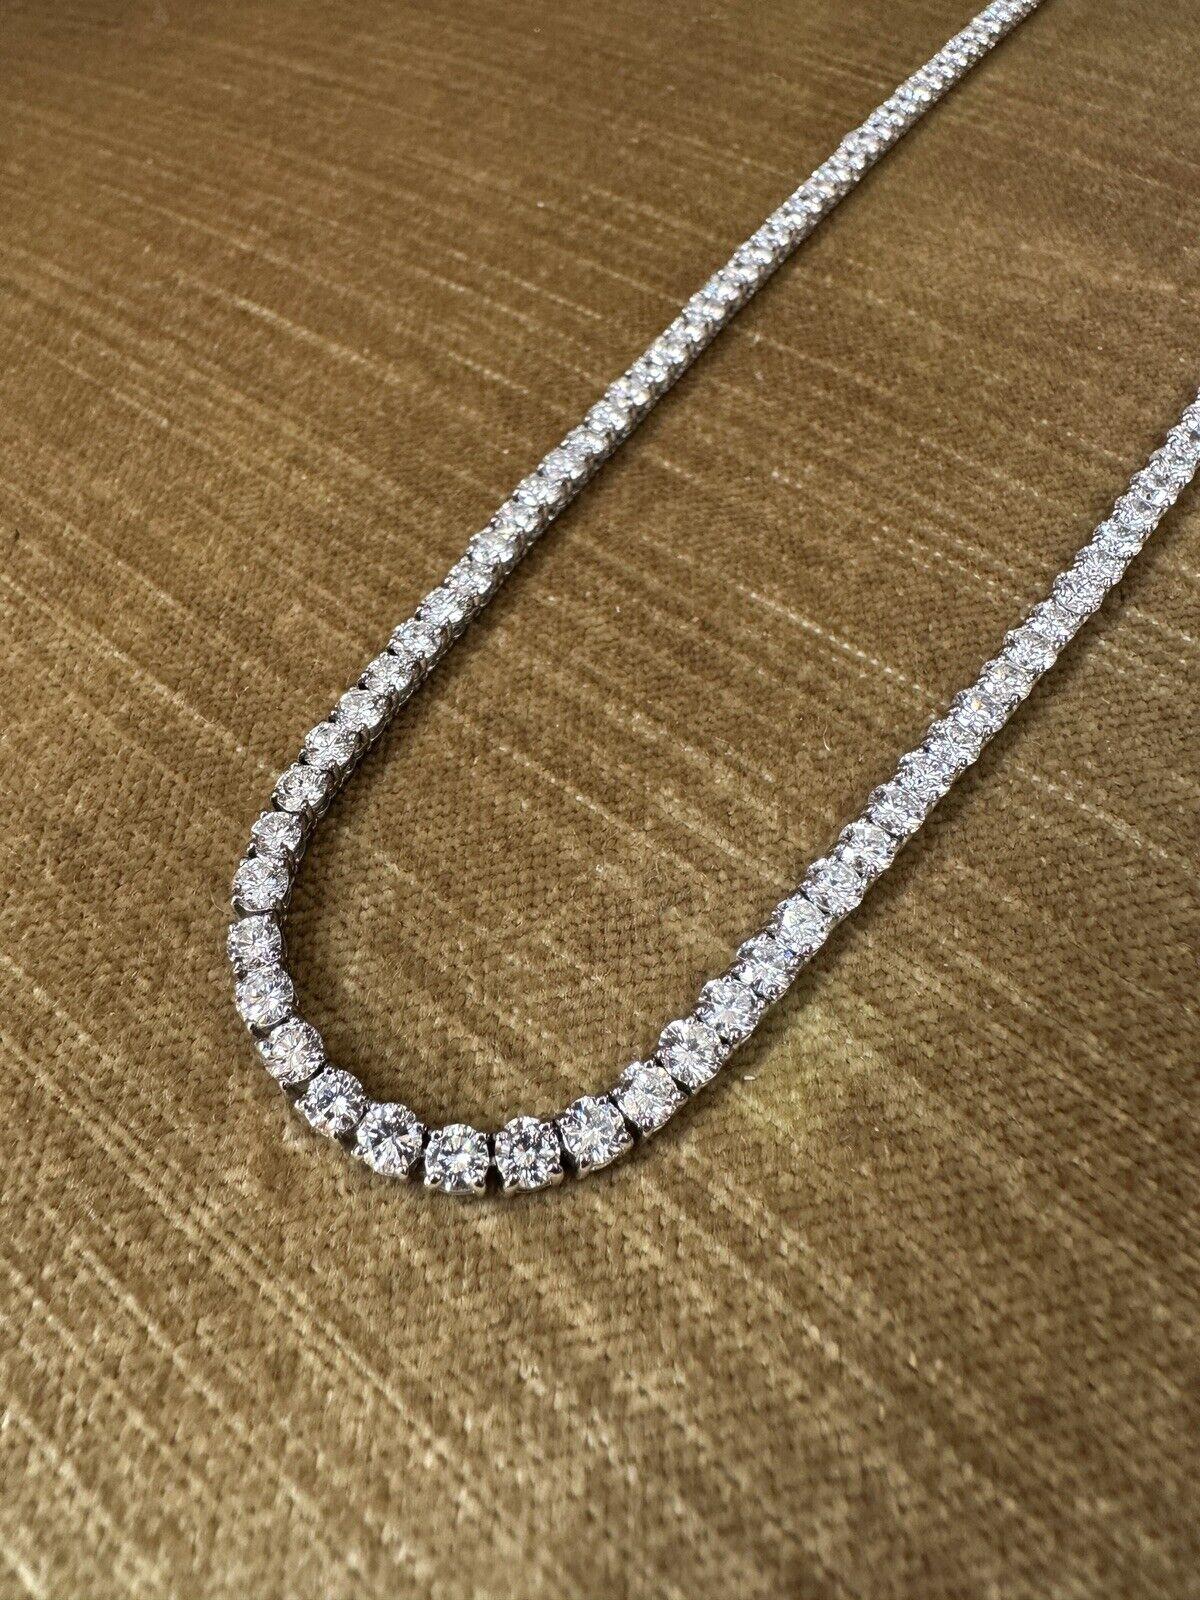 32.96 Carats Diamond Long Tennis Necklace in 18k White Gold In Excellent Condition For Sale In La Jolla, CA